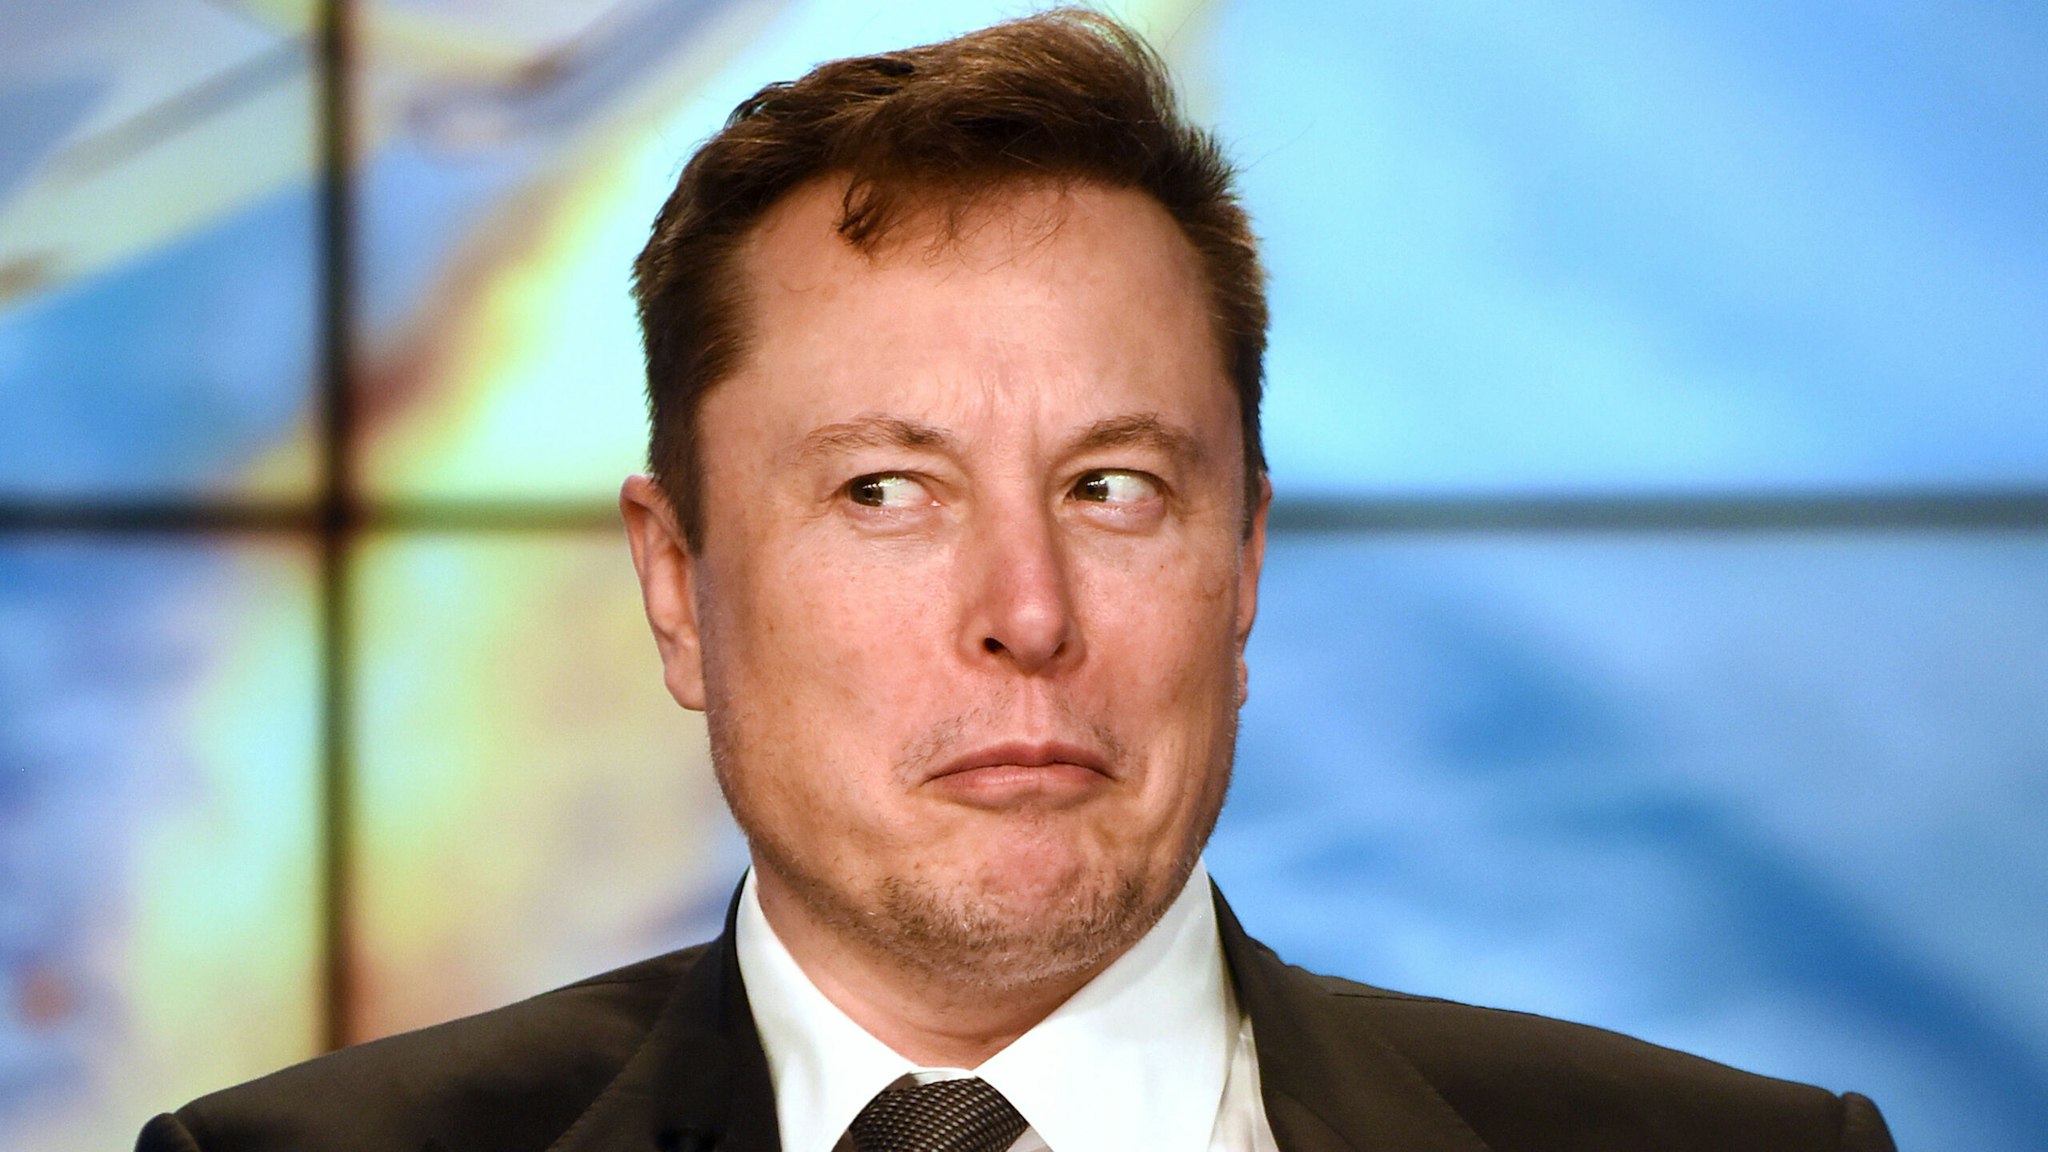 January 19, 2020 - Kennedy Space Center, Florida, United States - SpaceX CEO Elon Musk reacts to a question from the media at a press conference following the successful In-Flight Abort Test of the SpaceX Falcon 9 rocket and Crew Dragon capsule on January 19, 2020 at the Kennedy Space Center in Florida.